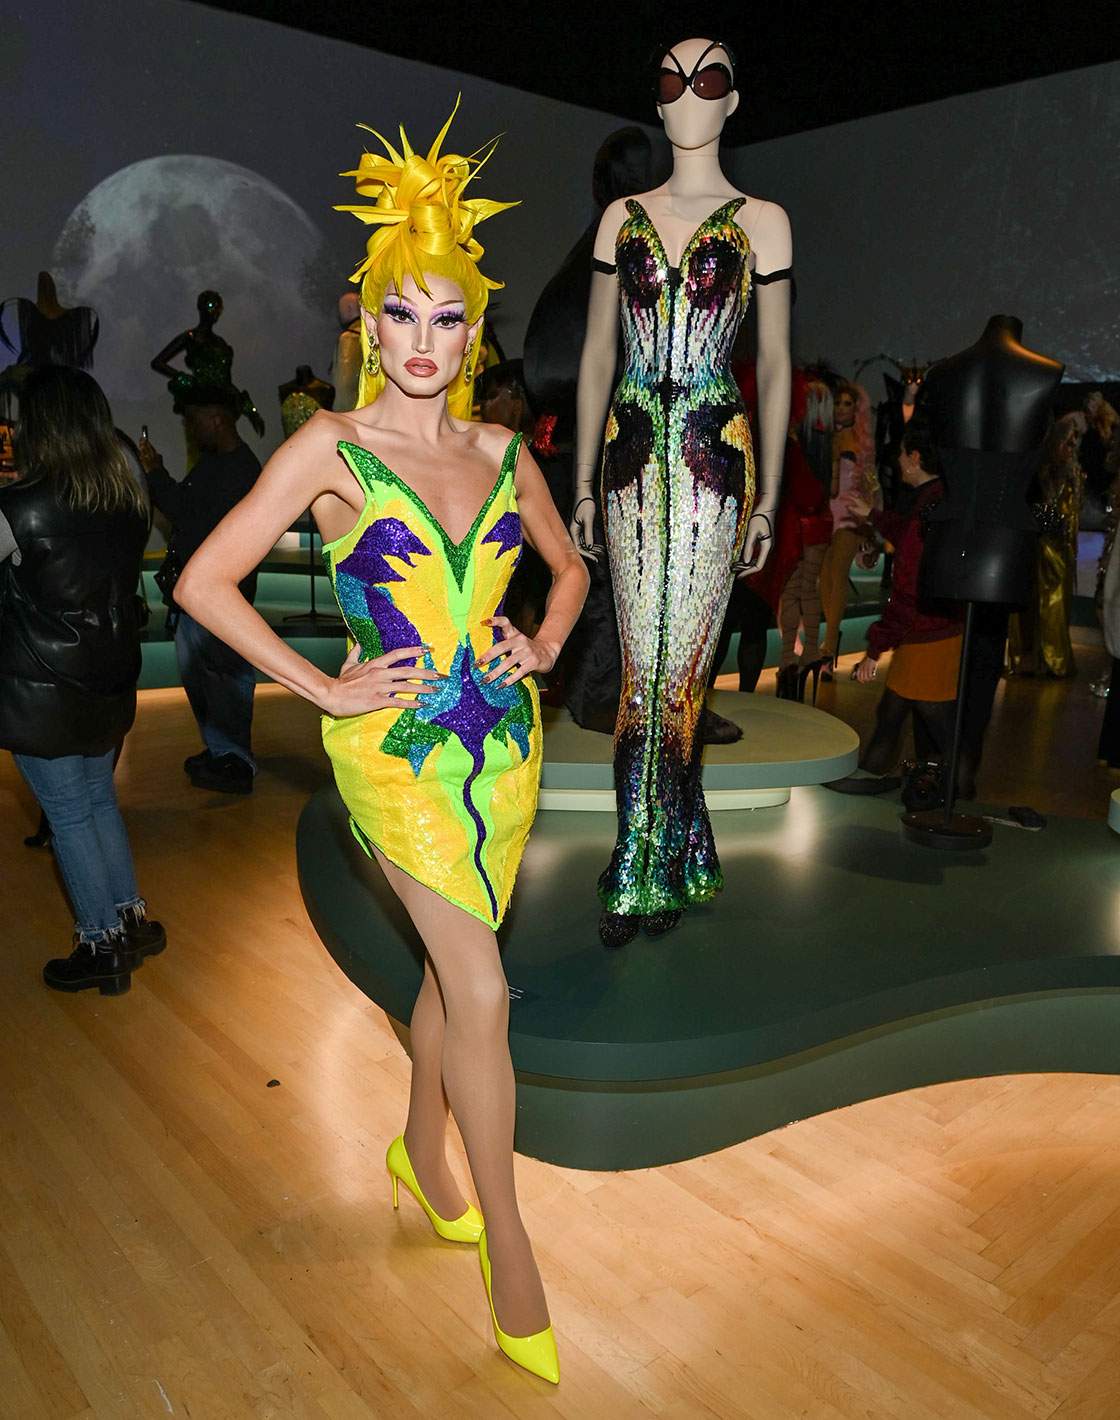 Cast of RuPaul's Drag Race visits the Mugler Exhibition at Brooklyn Museum